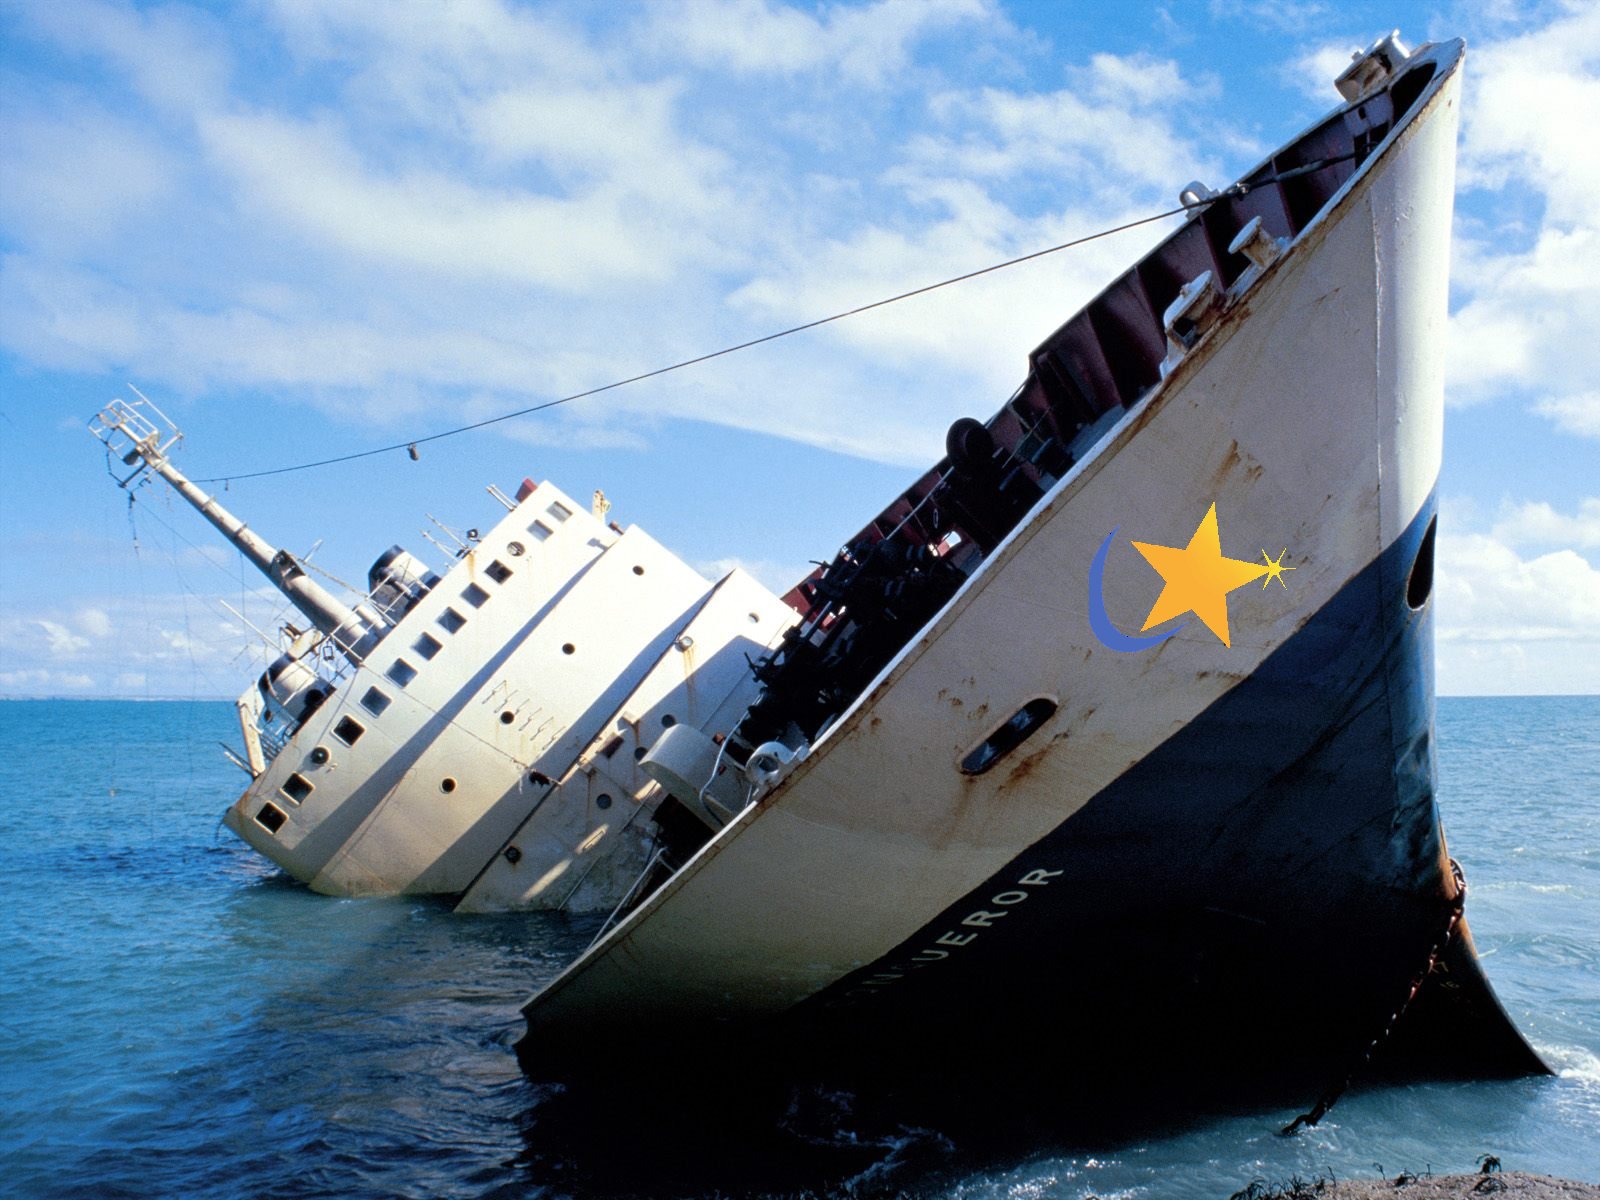 Funny pictures of boats sinking